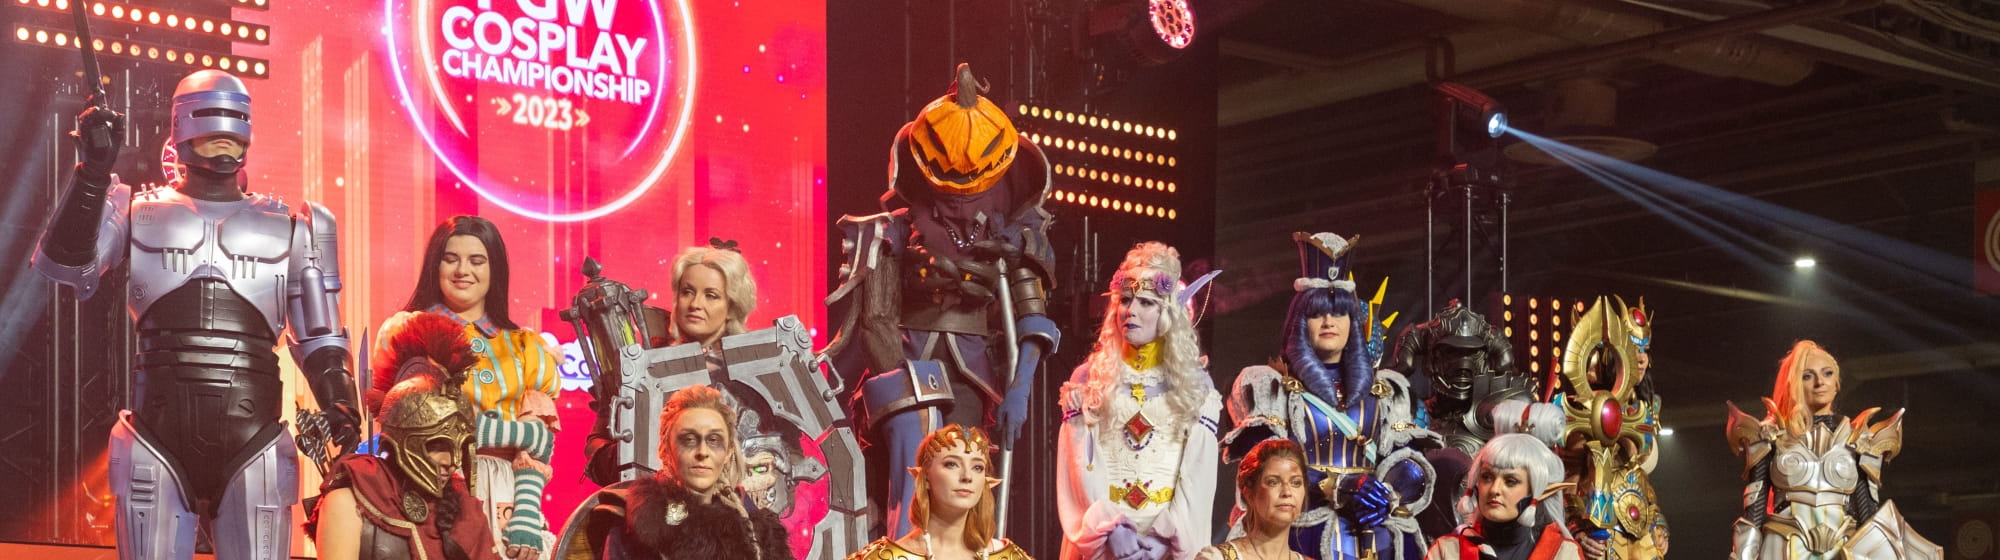 Banner photo of a group of cosplayers at Paris Games Week 2023